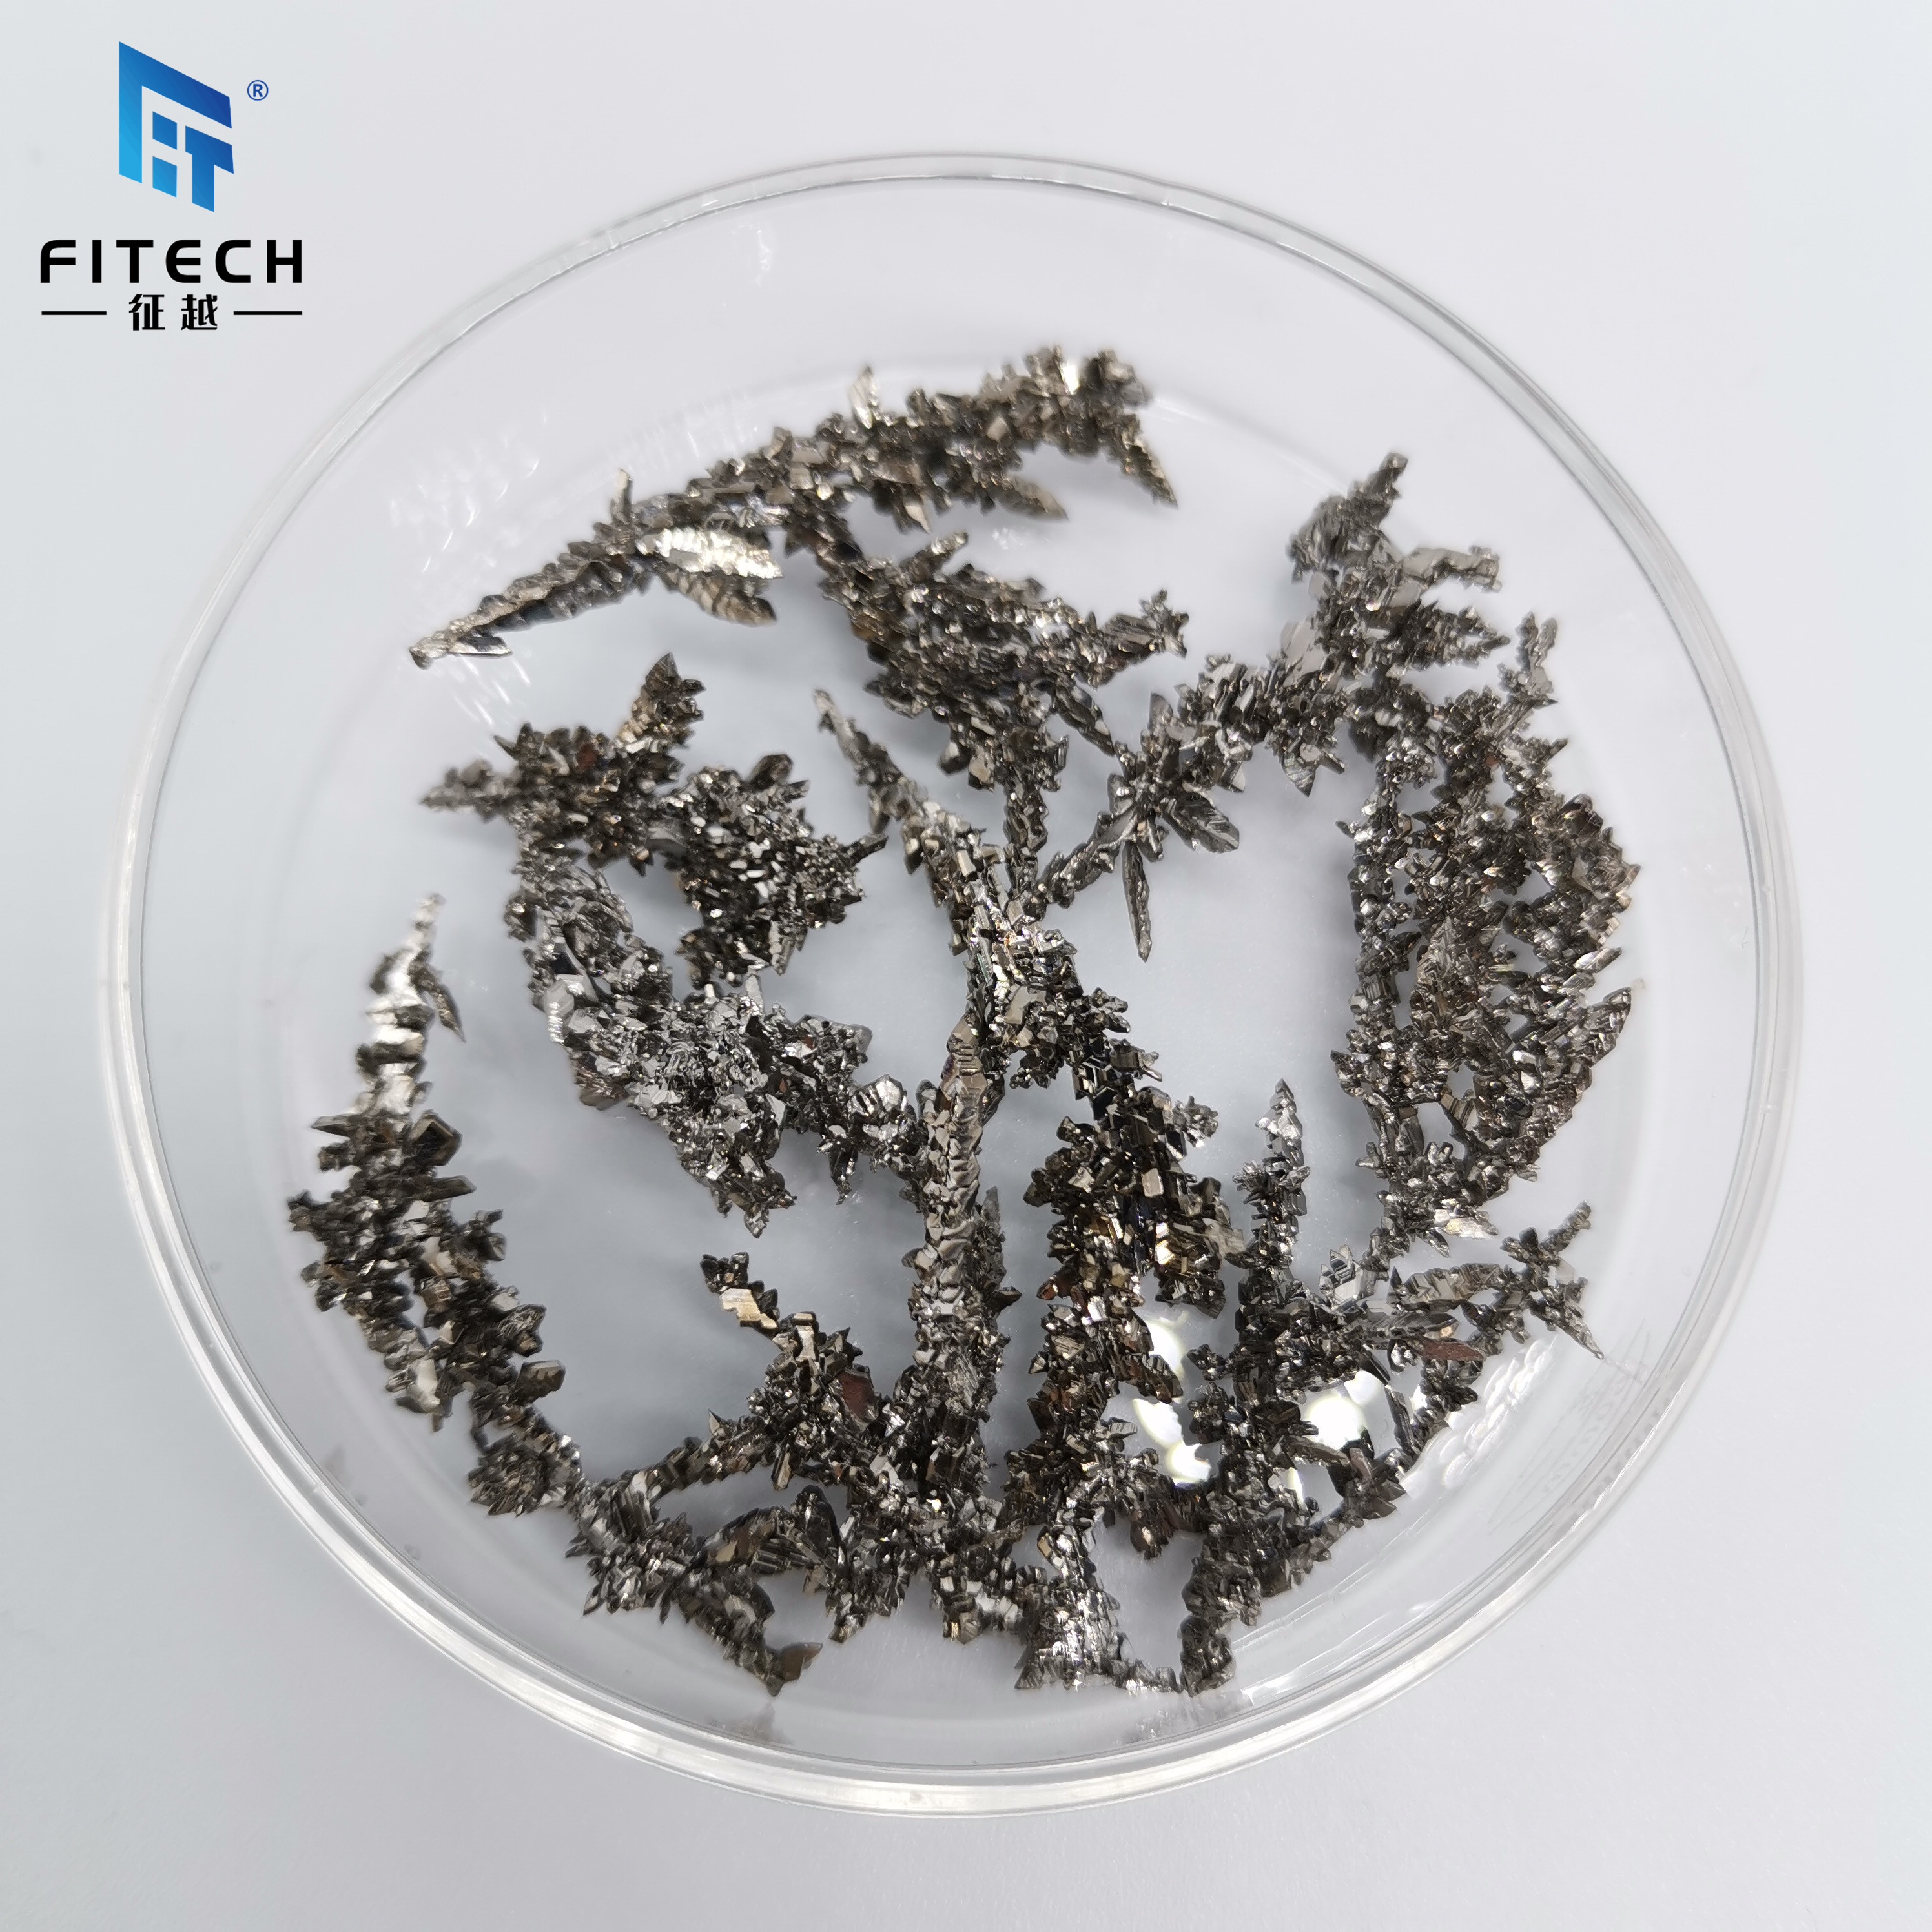 Metal Titanium Granules Produced by China Manufacture